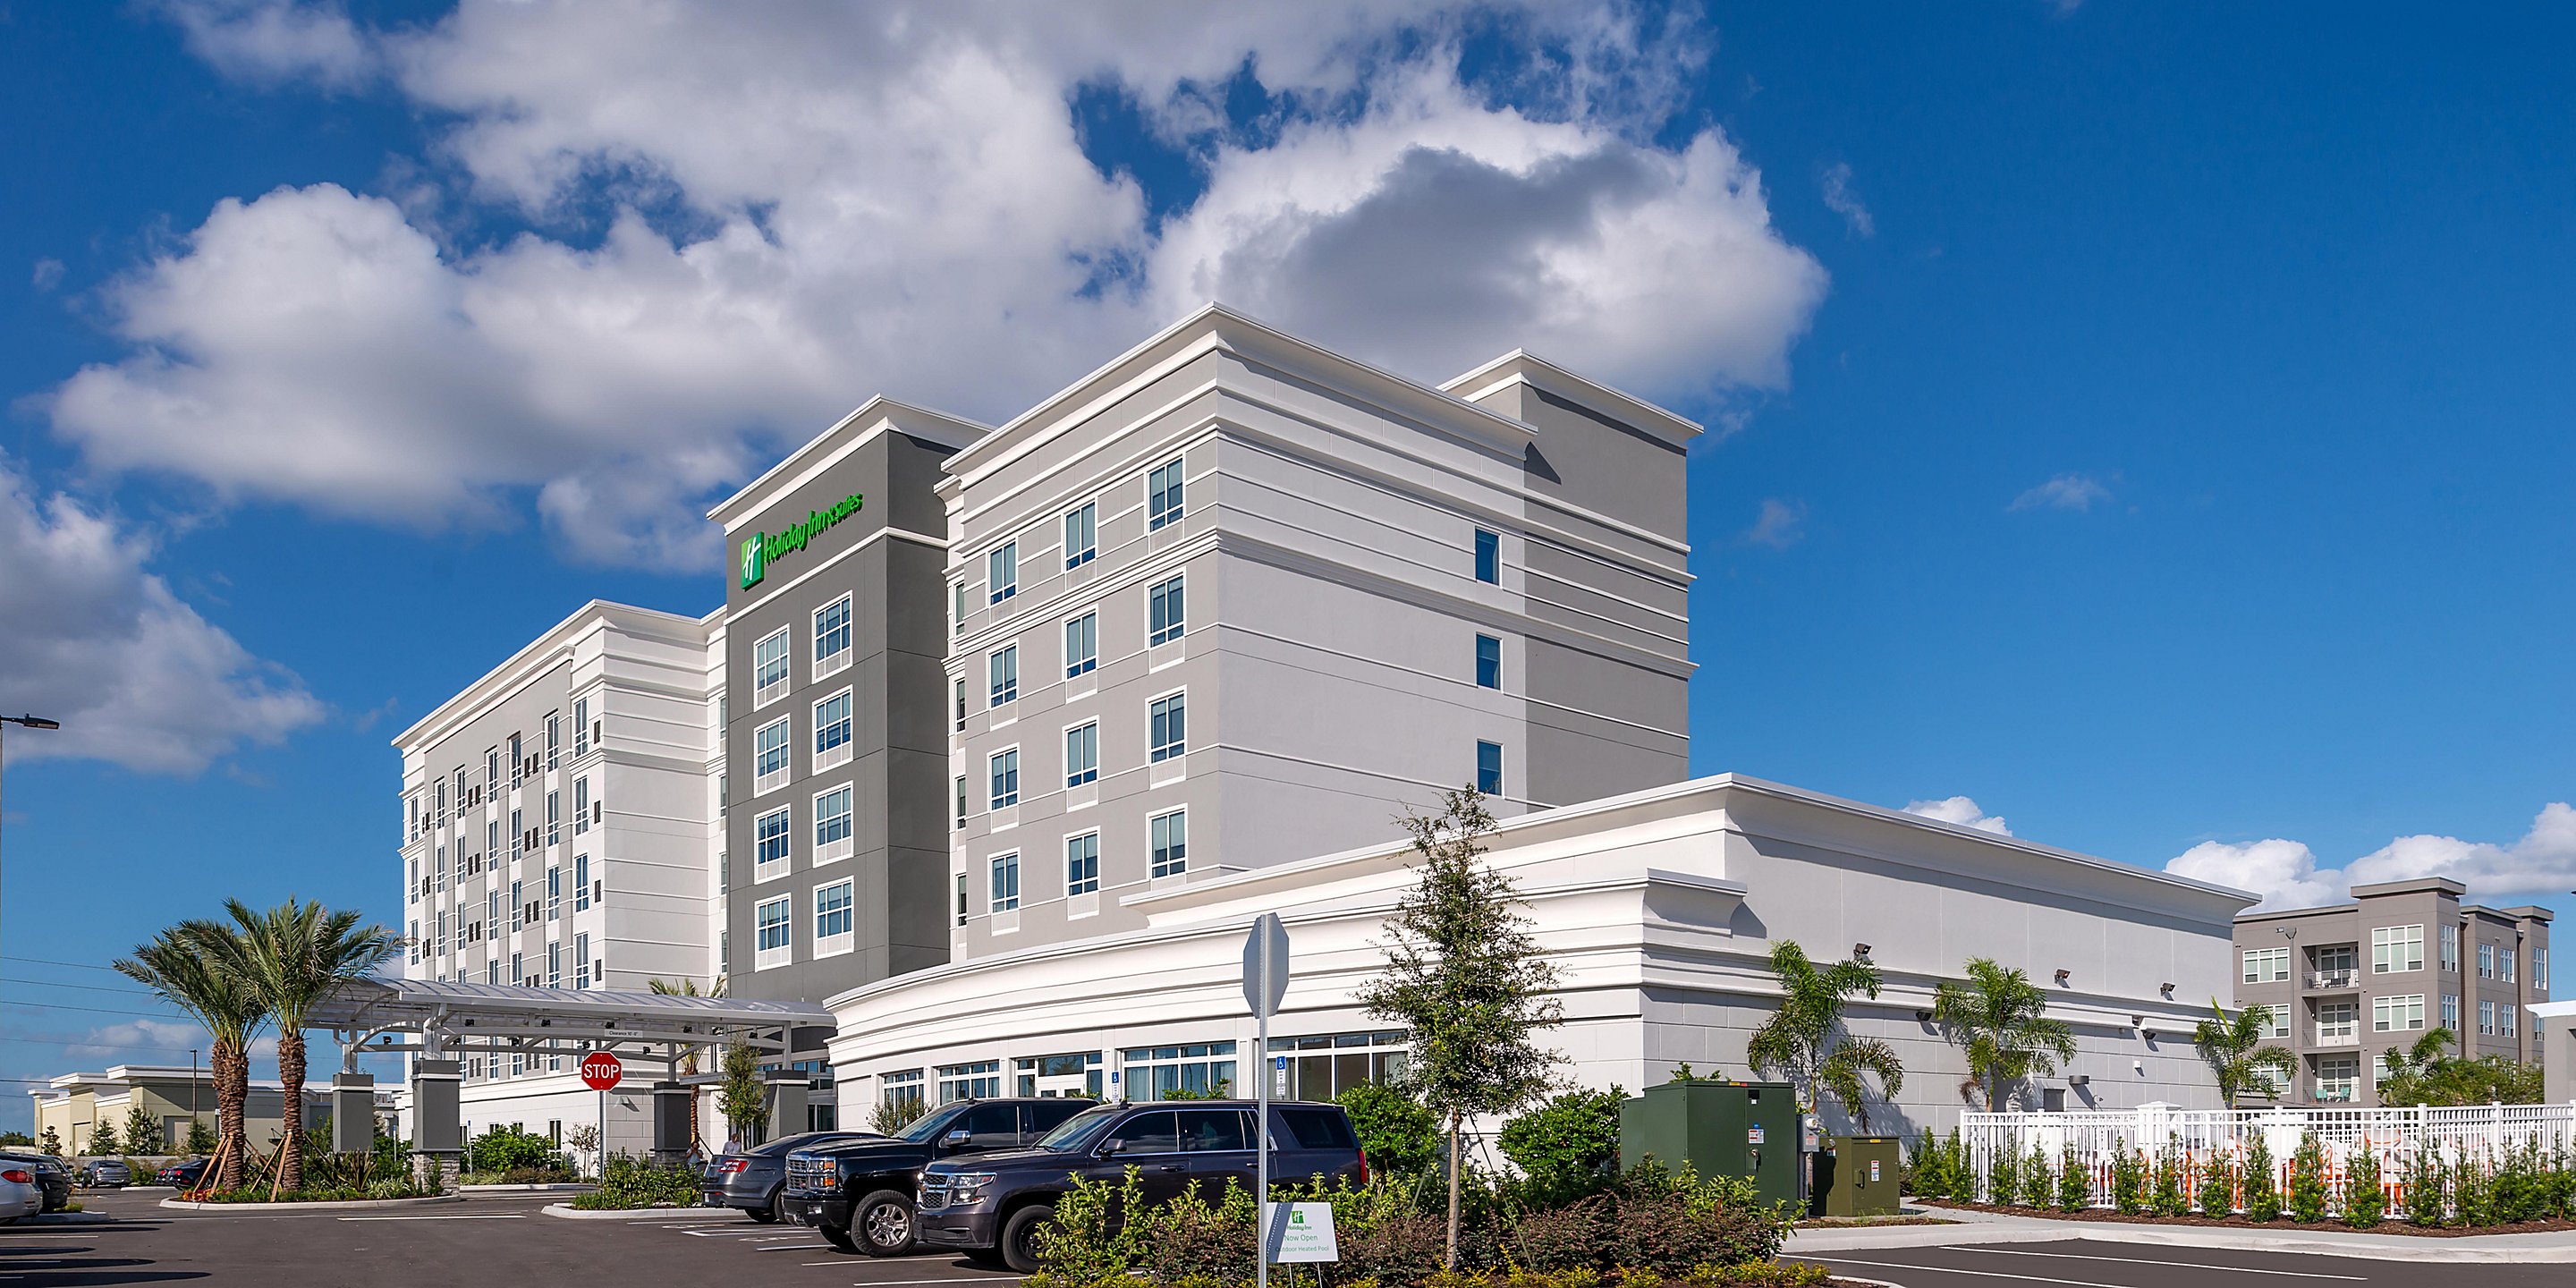 Holiday Inn Hotel And Suites Orlando 6187068633 2x1 